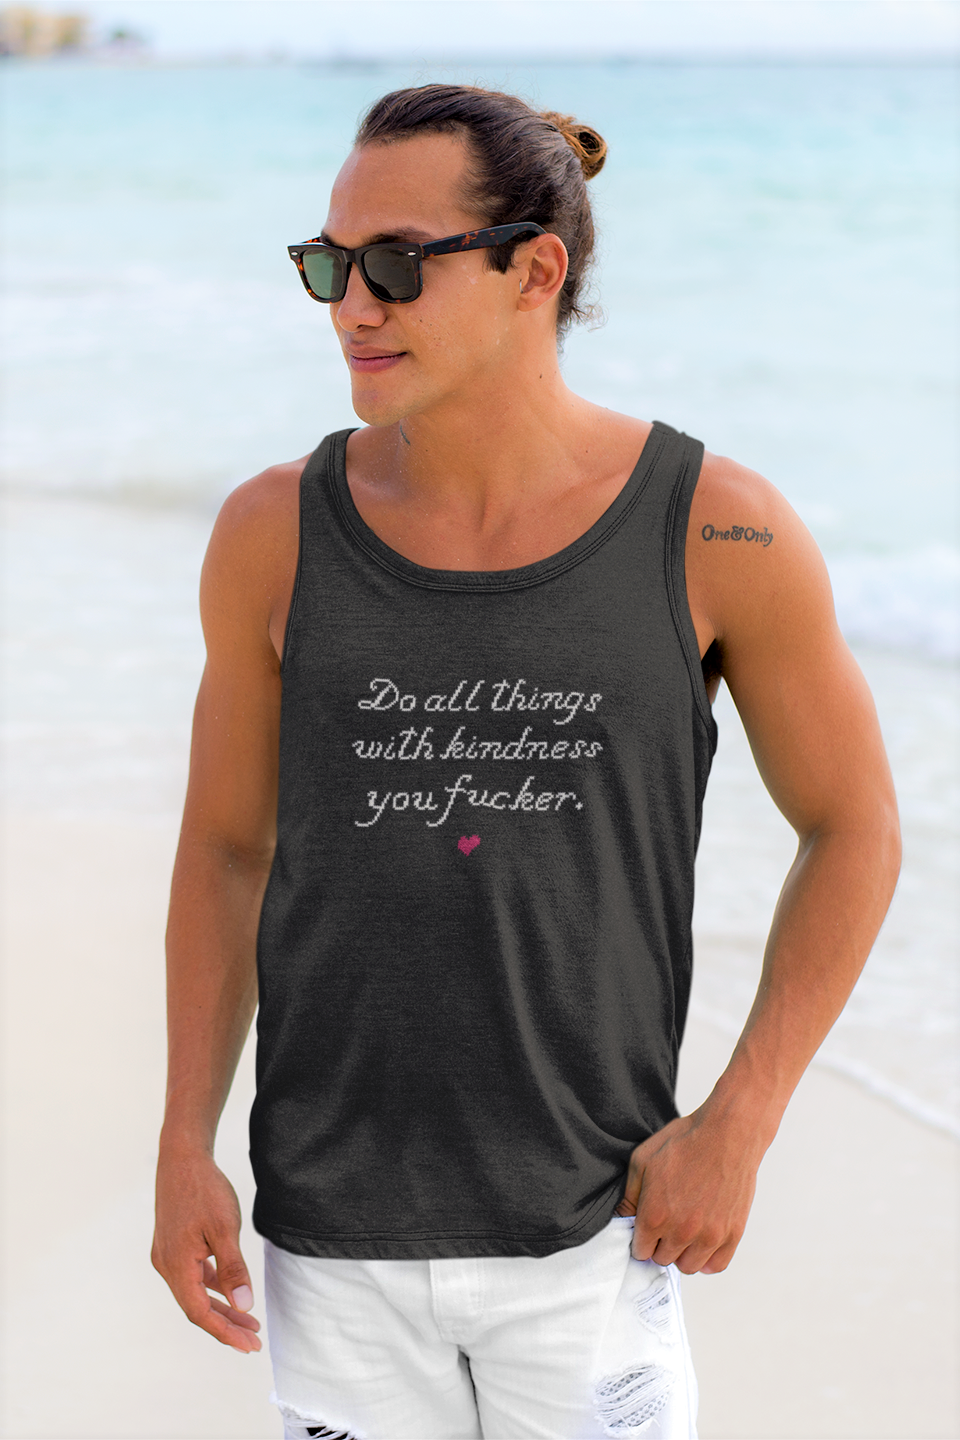 Do all things with Kindness fucker : Unisex Tank Top 100% Cotton